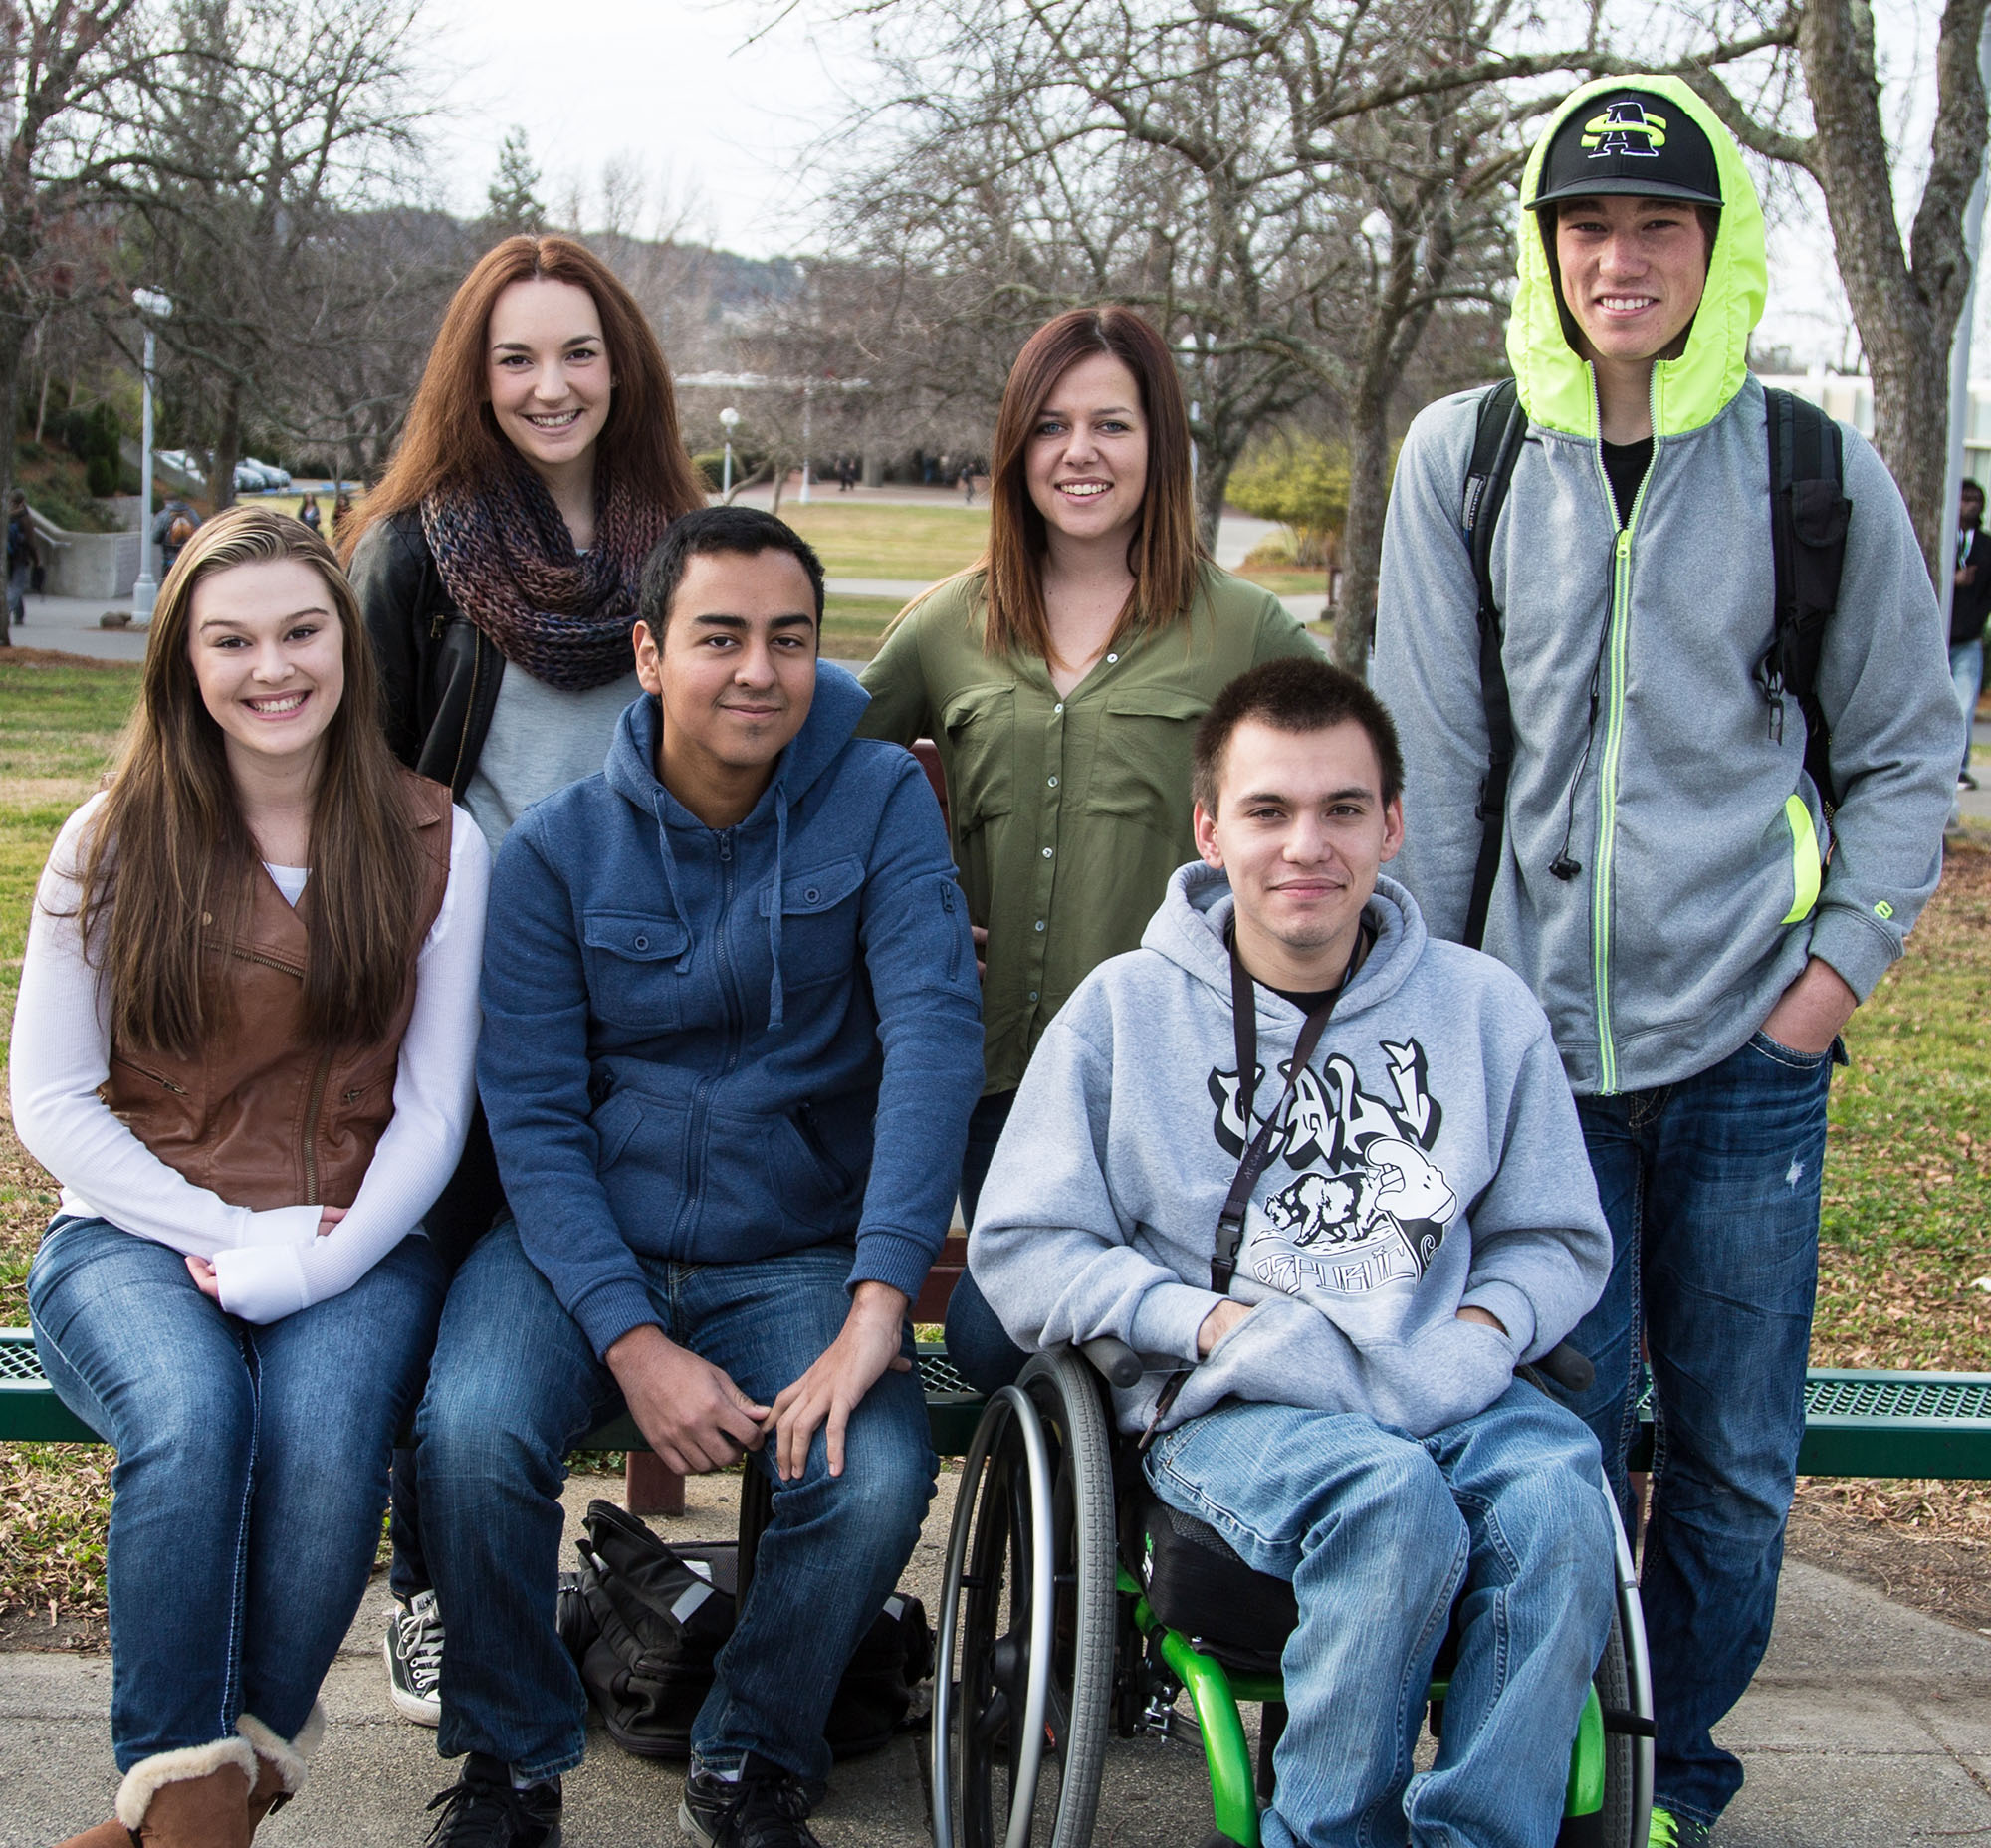 Three female students, two male students of color, one male student in a wheelchair